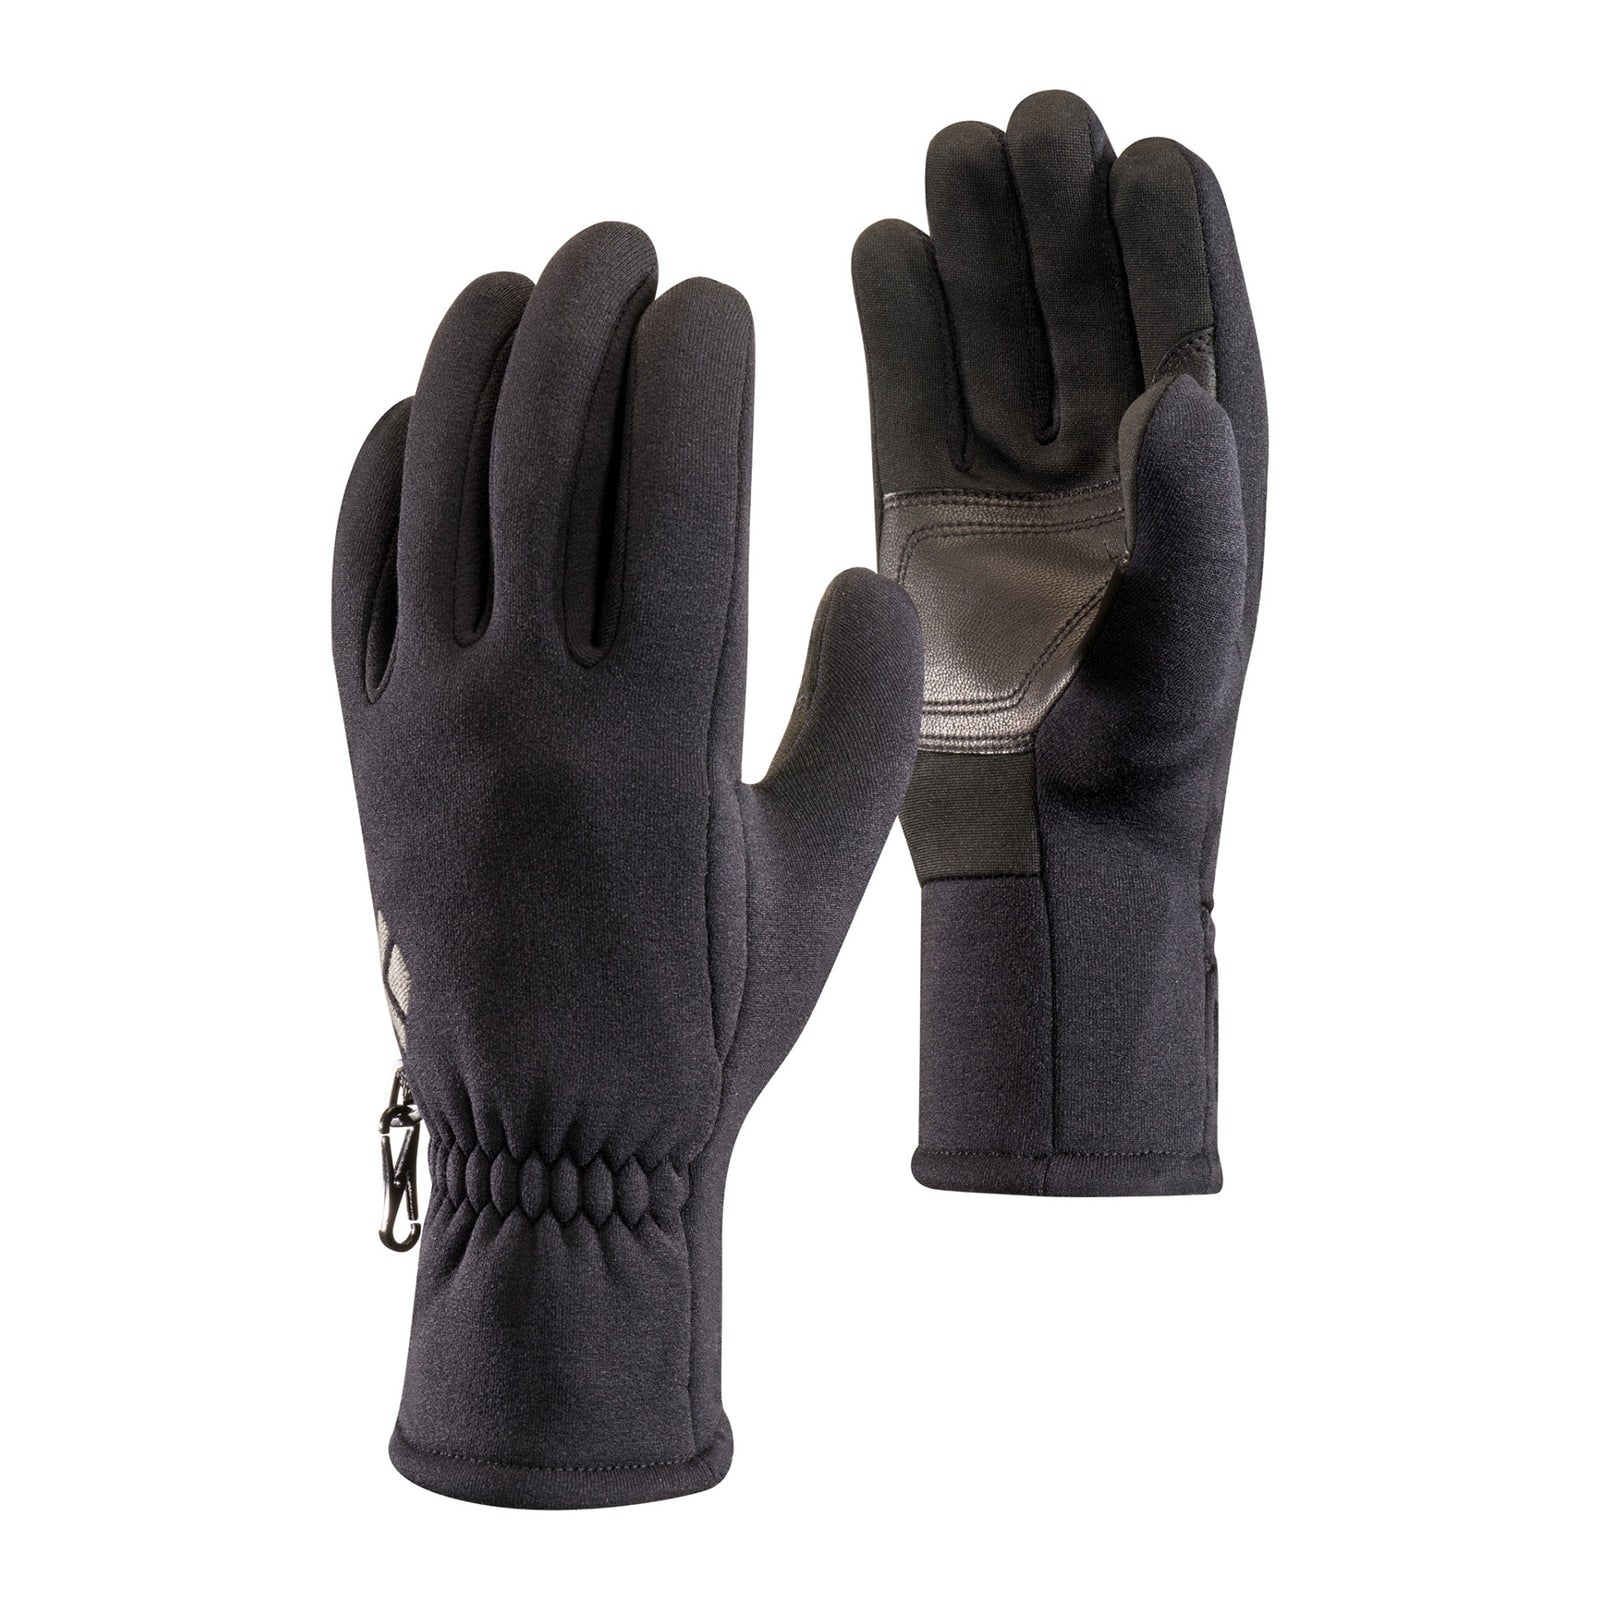 a pair of black gloves